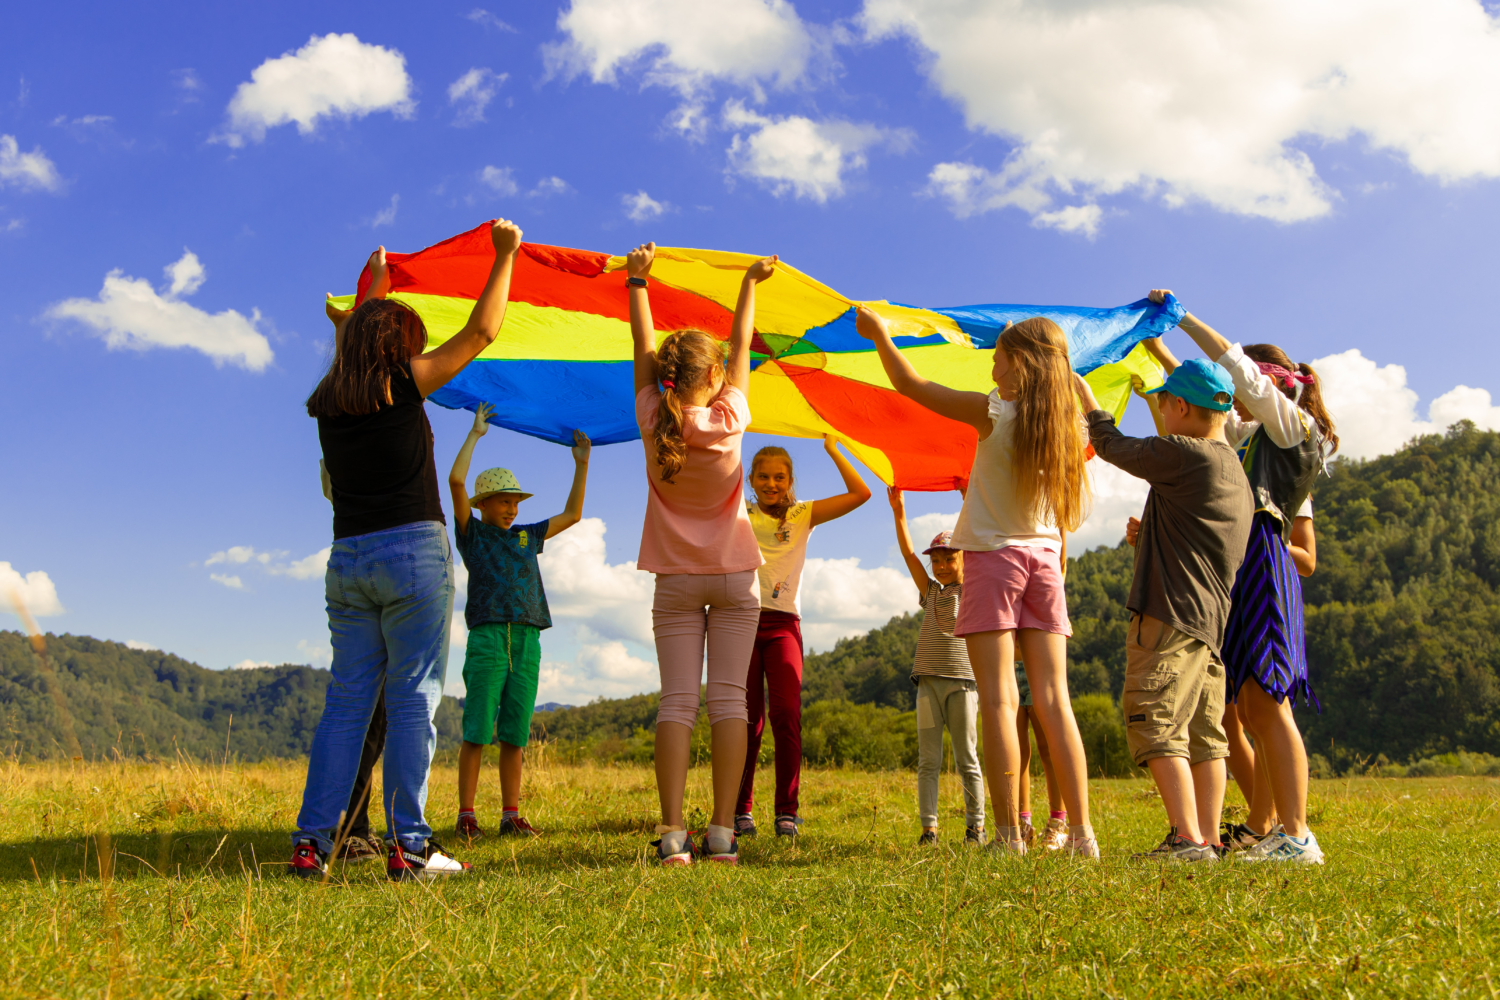 Celebrate Summer! How to Make the Most of Your Time with the Kids